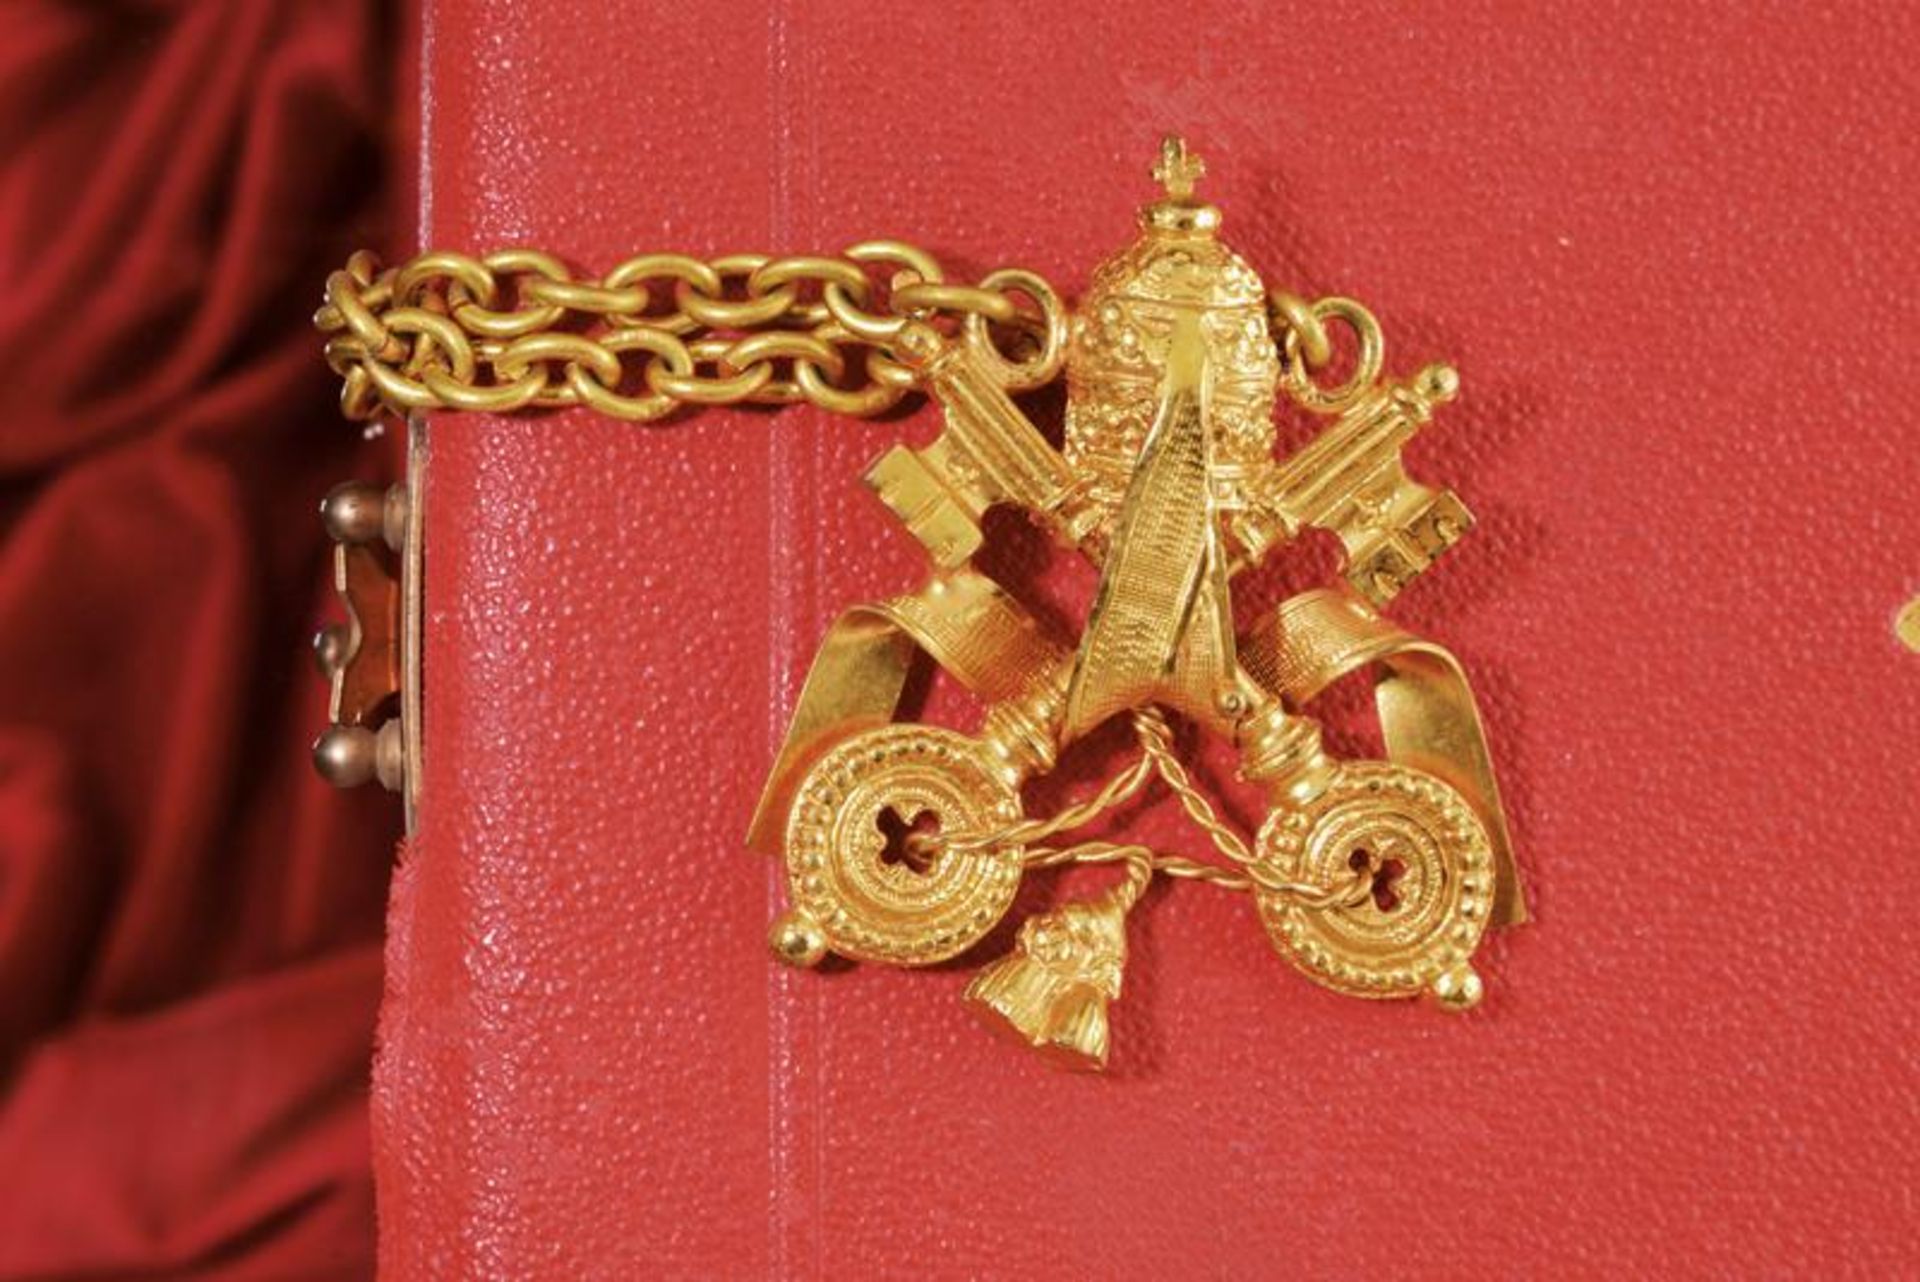 A Papal gentleman's collar from Pope Benedict XV's time - Bild 4 aus 5